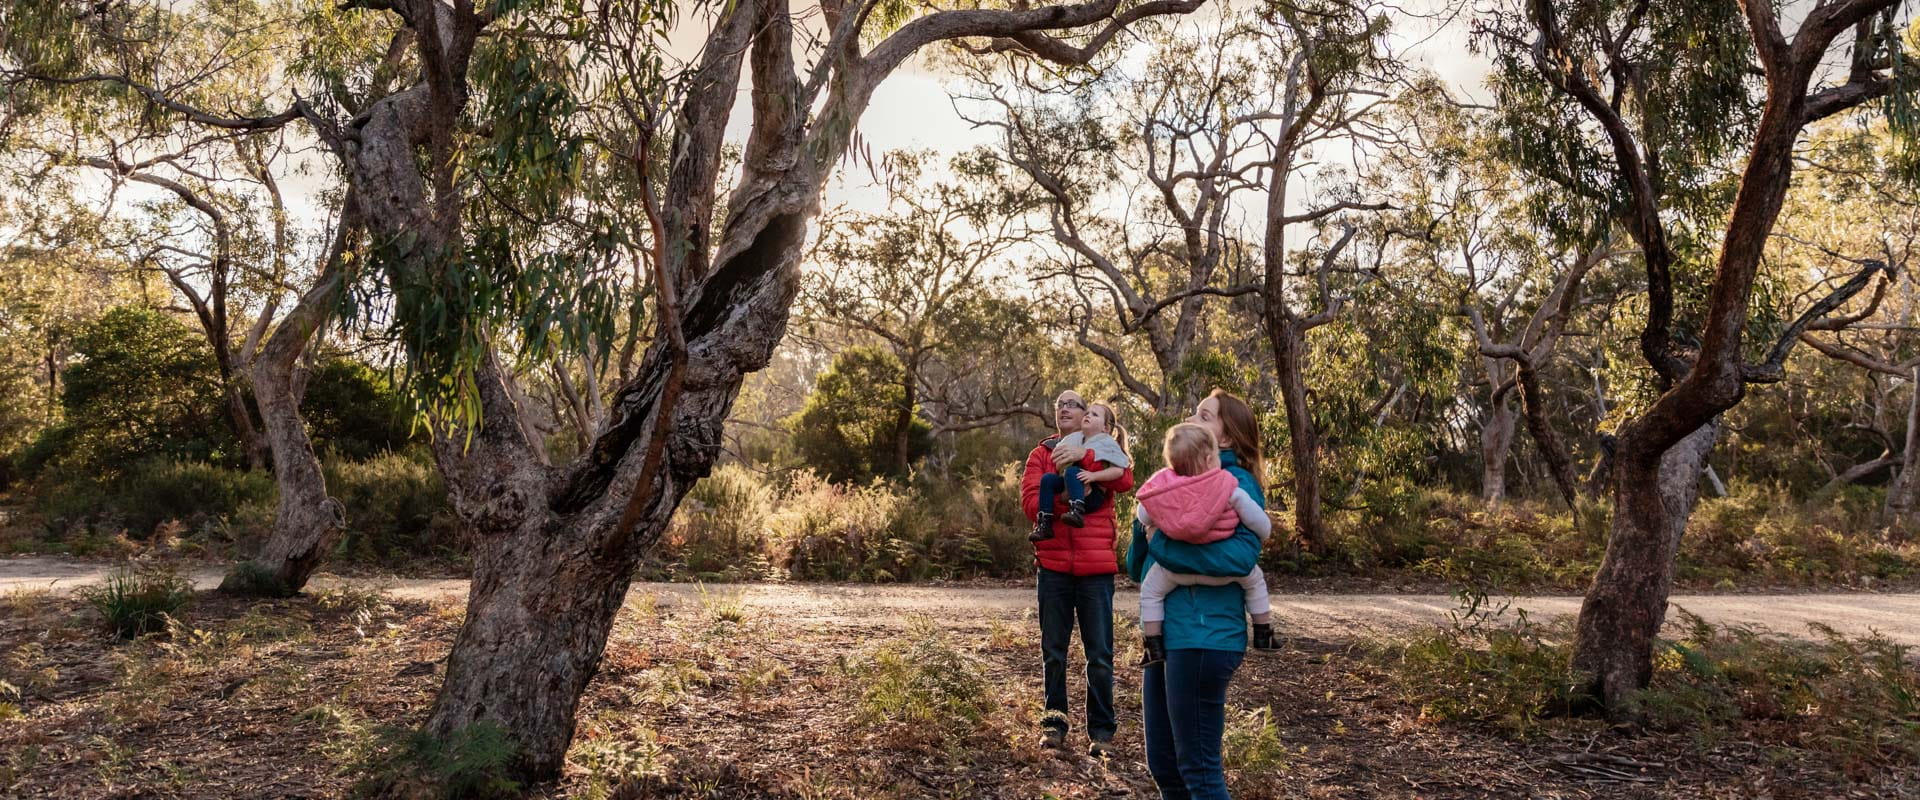 A family walk through a forested area, looking up into the trees to spot koalas.